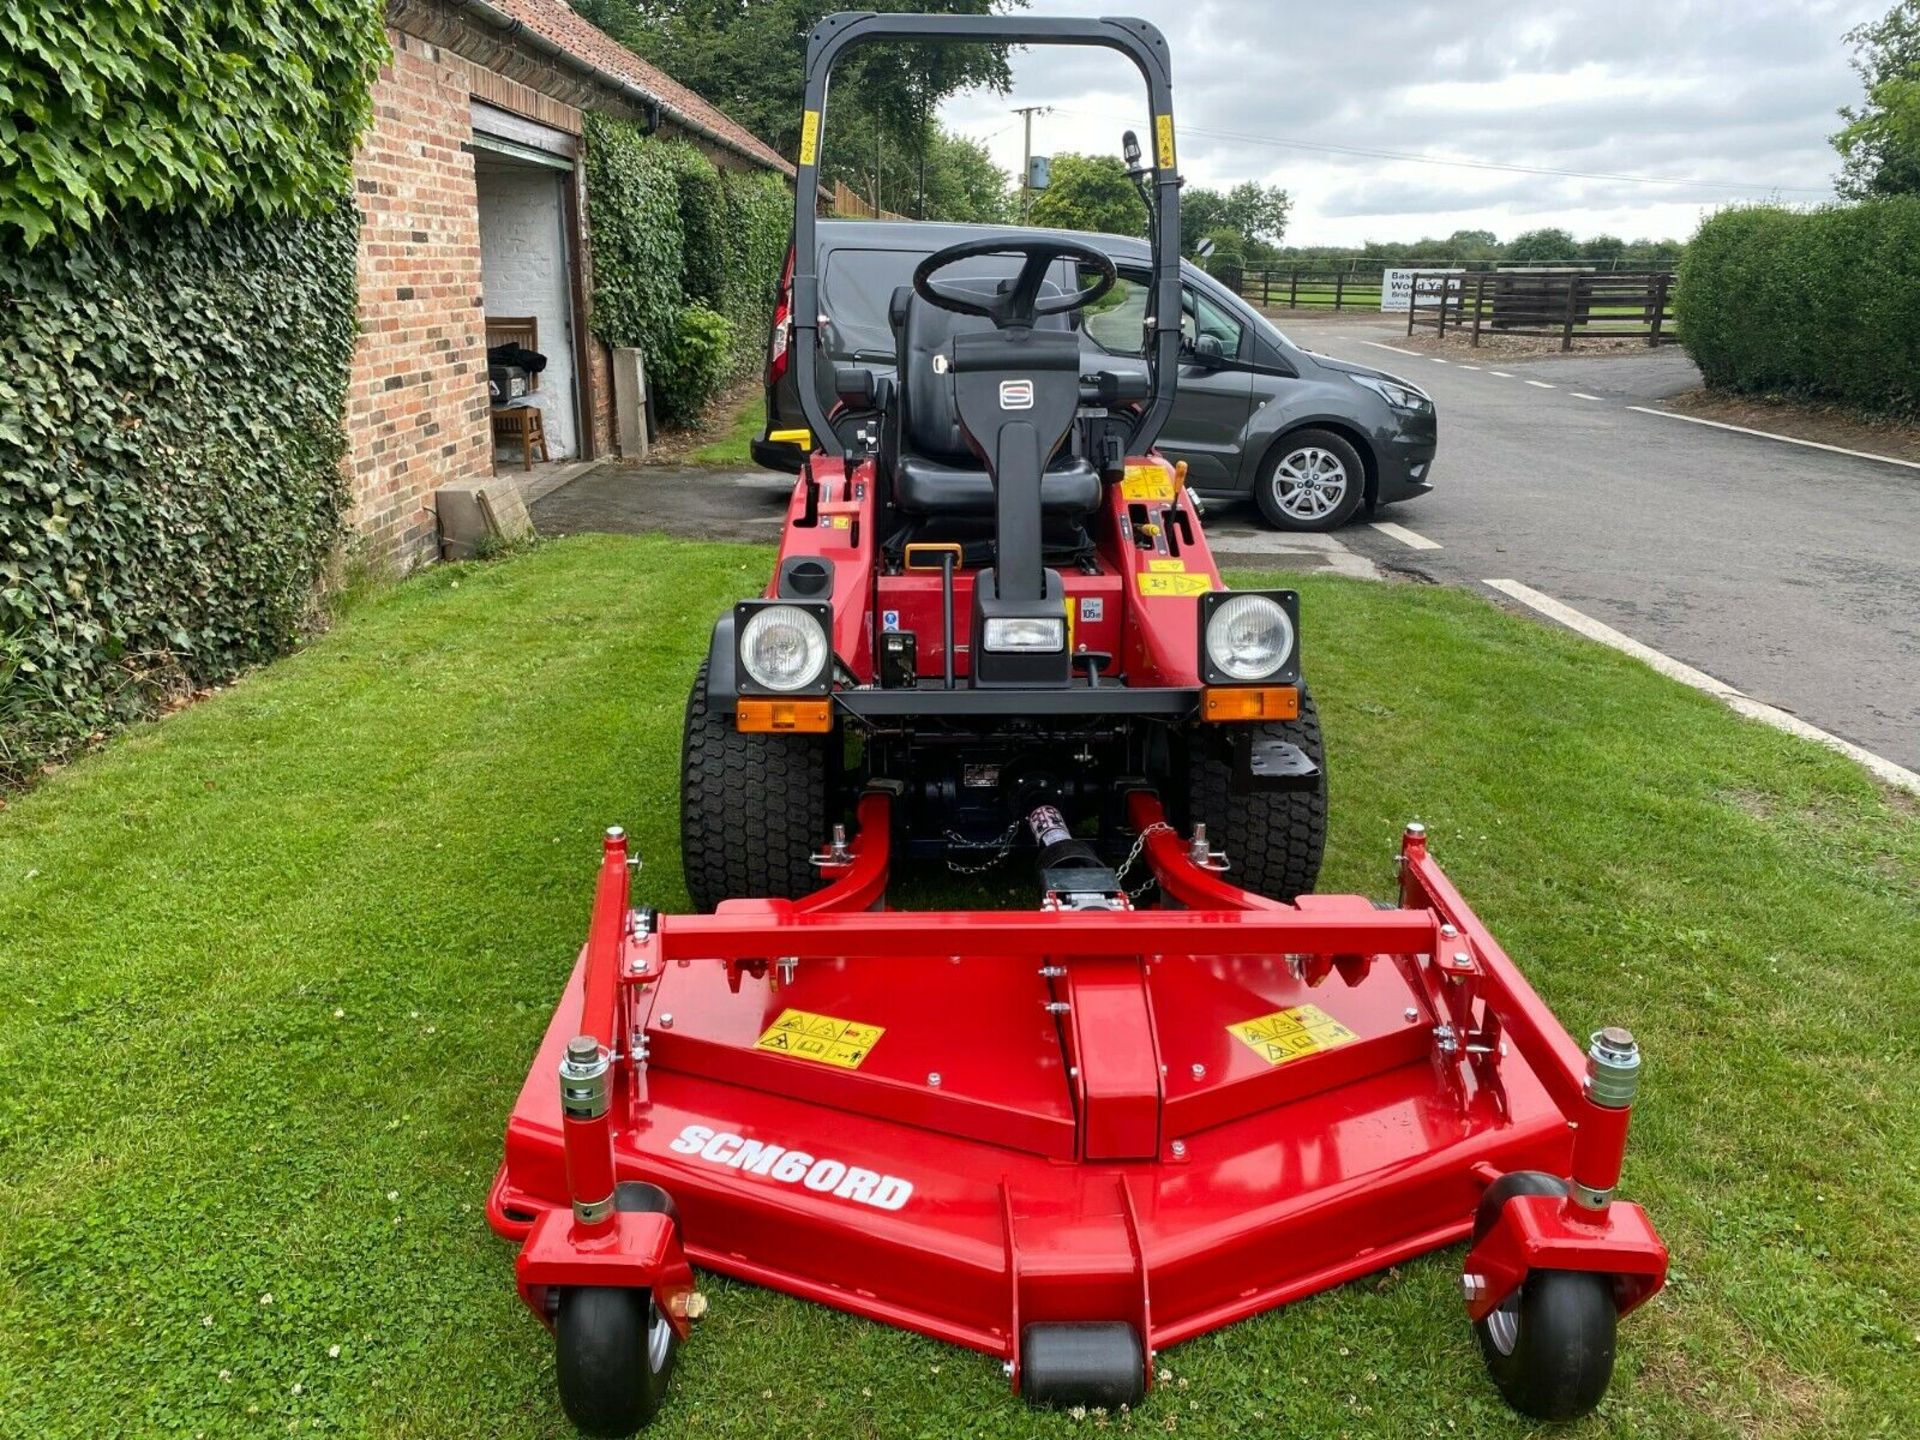 SHIBAURA CM374 UPFRONT ROTARY MOWER, 37HP, BRAND NEW 60" CUT DECK NEVER USED, DIESEL, YEAR 2014 - Image 7 of 7